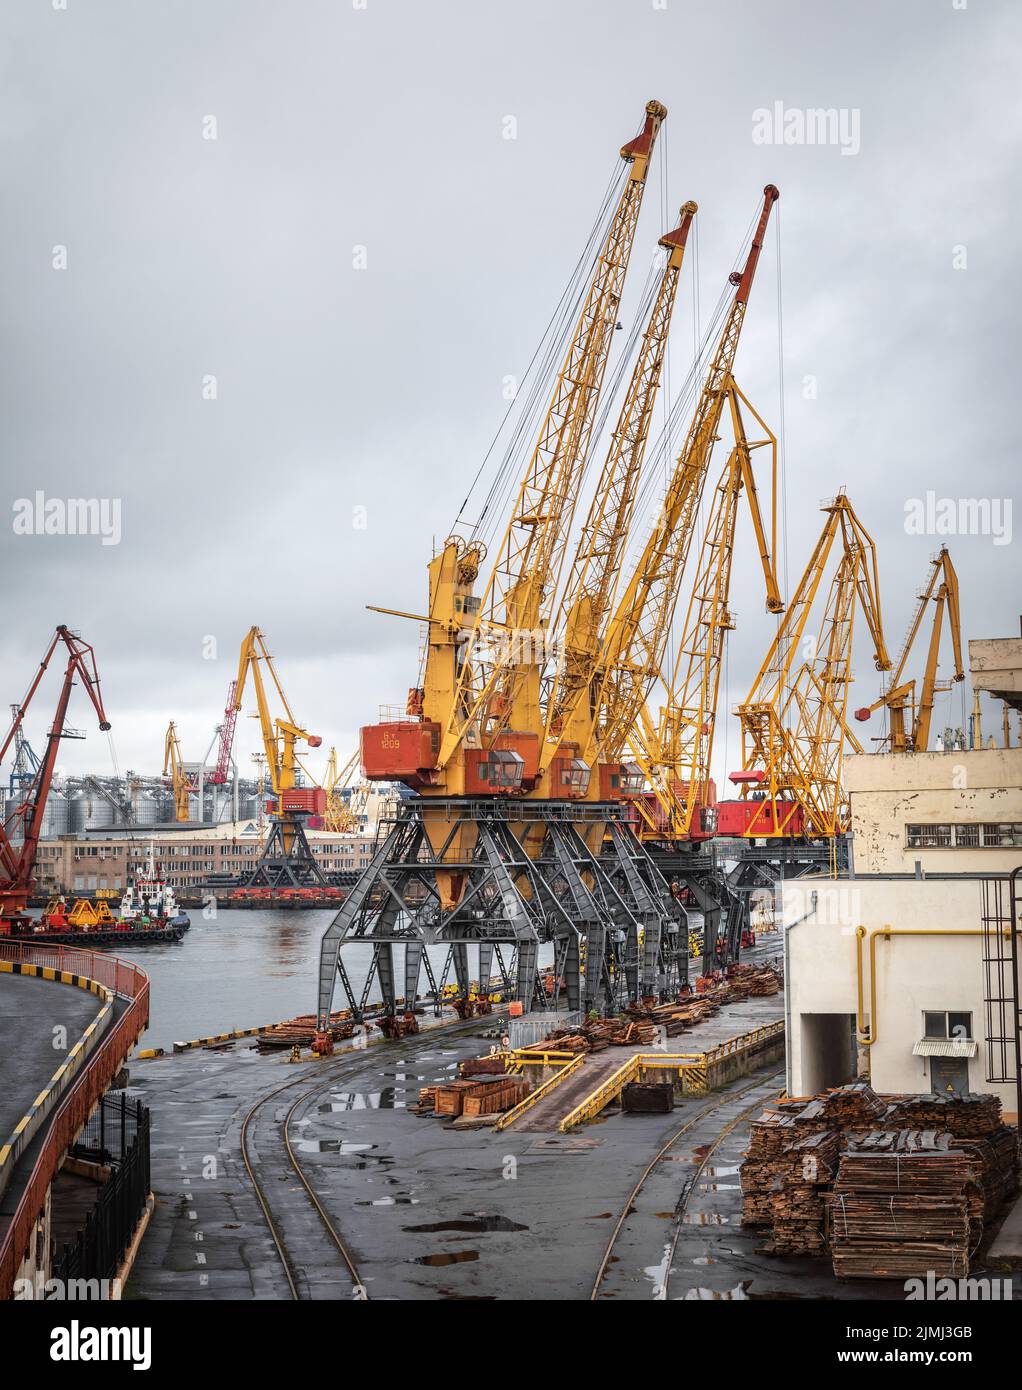 Odessa, Ukraine. 10th Sep, 2018. Container cranes seen at the Marine Industrial Commercial Port. For the first time since the beginning of the Russian war of aggression against Ukraine, a ship carrying grain has left the port of Odessa. This should make millions of tons of grain available again for the world market. Before the Russian war of aggression, Ukraine was one of the world's most important grain exporters. For them, billions in revenue from the sale of wheat and corn, among other commodities, is at stake. (Credit Image: © Mykhaylo Palinchak/SOPA Images via ZUMA Press Wire) Stock Photo